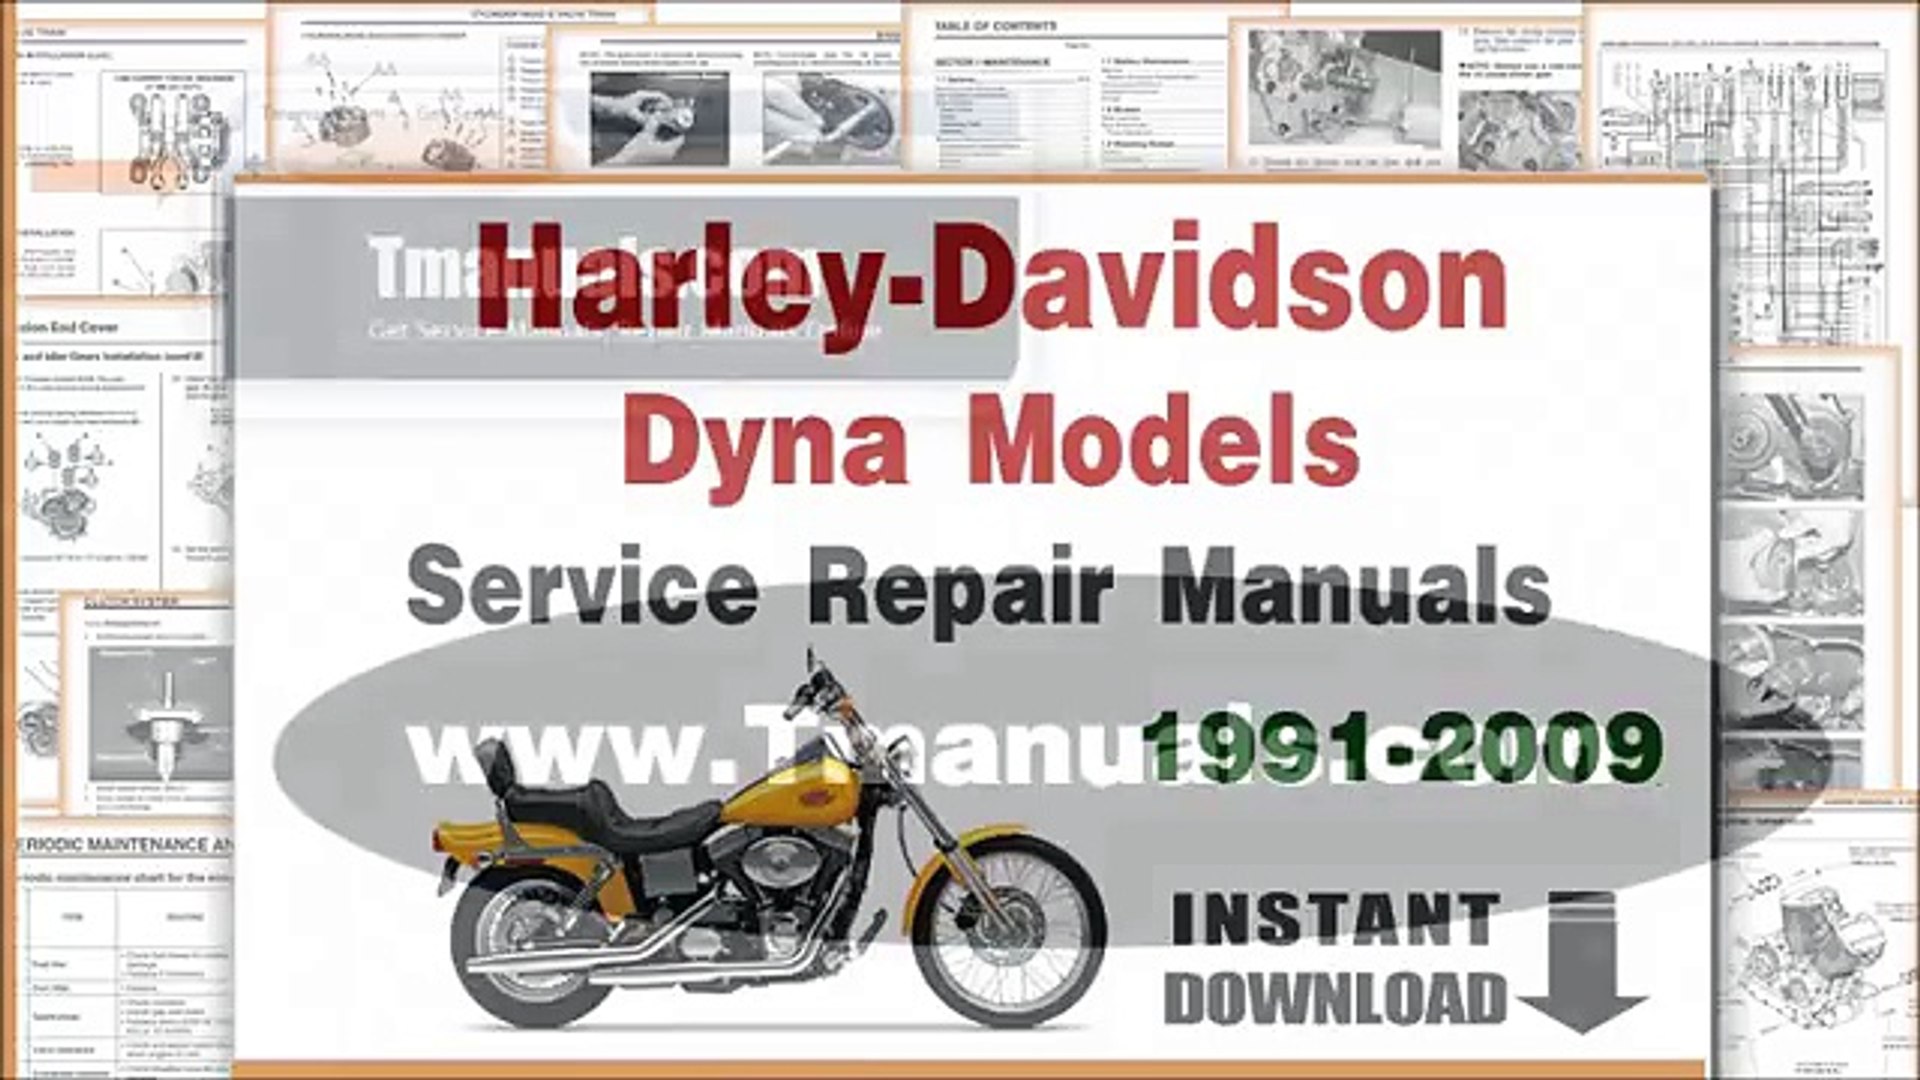 Harley-Davidson Dyna FXD Motorcycles Service Repair Manuals PDF